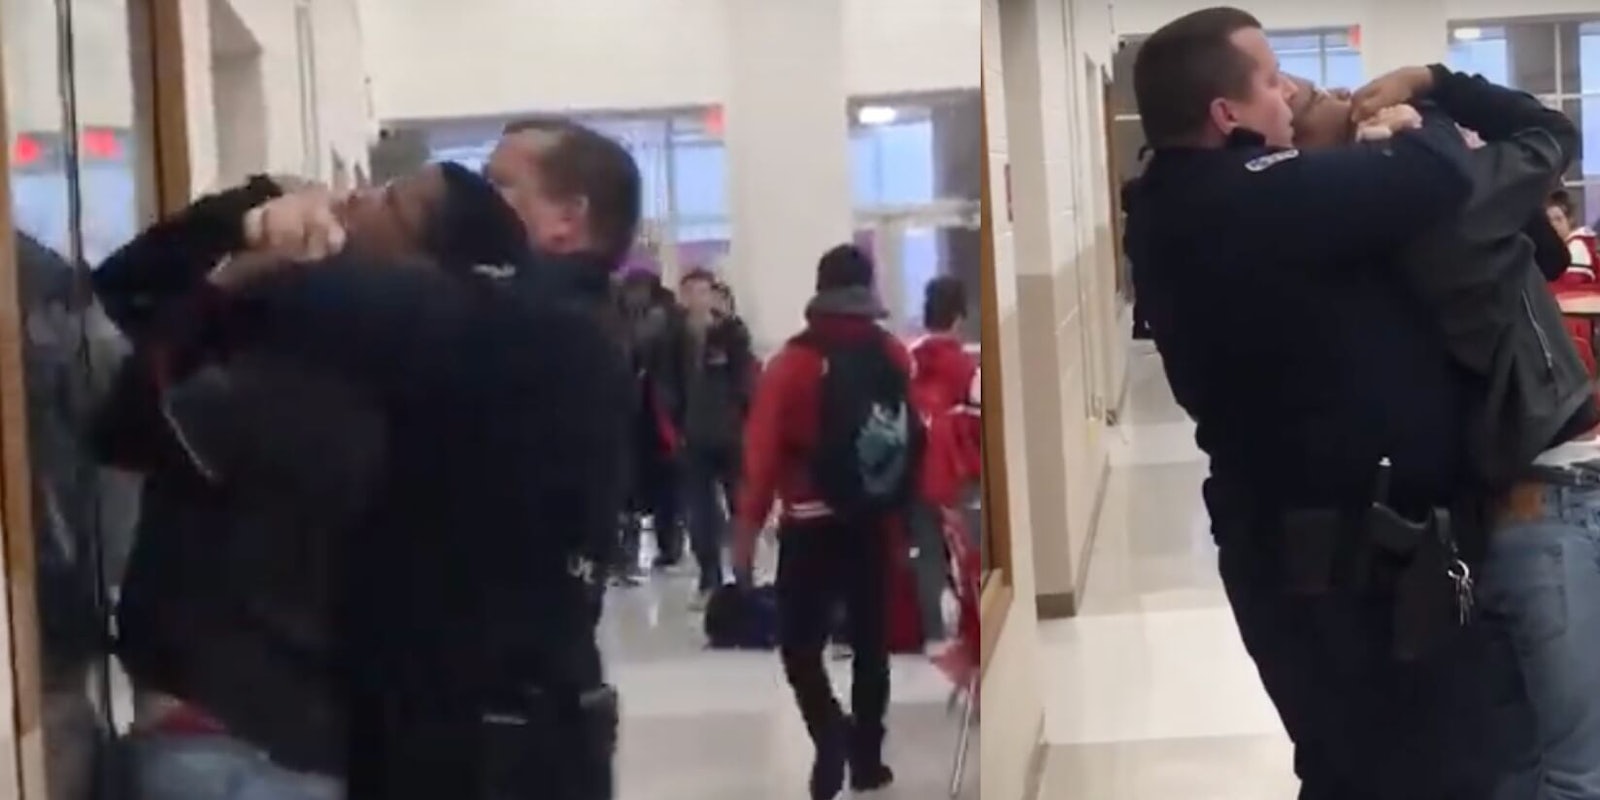 Officer Jake Perry seen holding a student in chokehold against the wall, and then facing other students